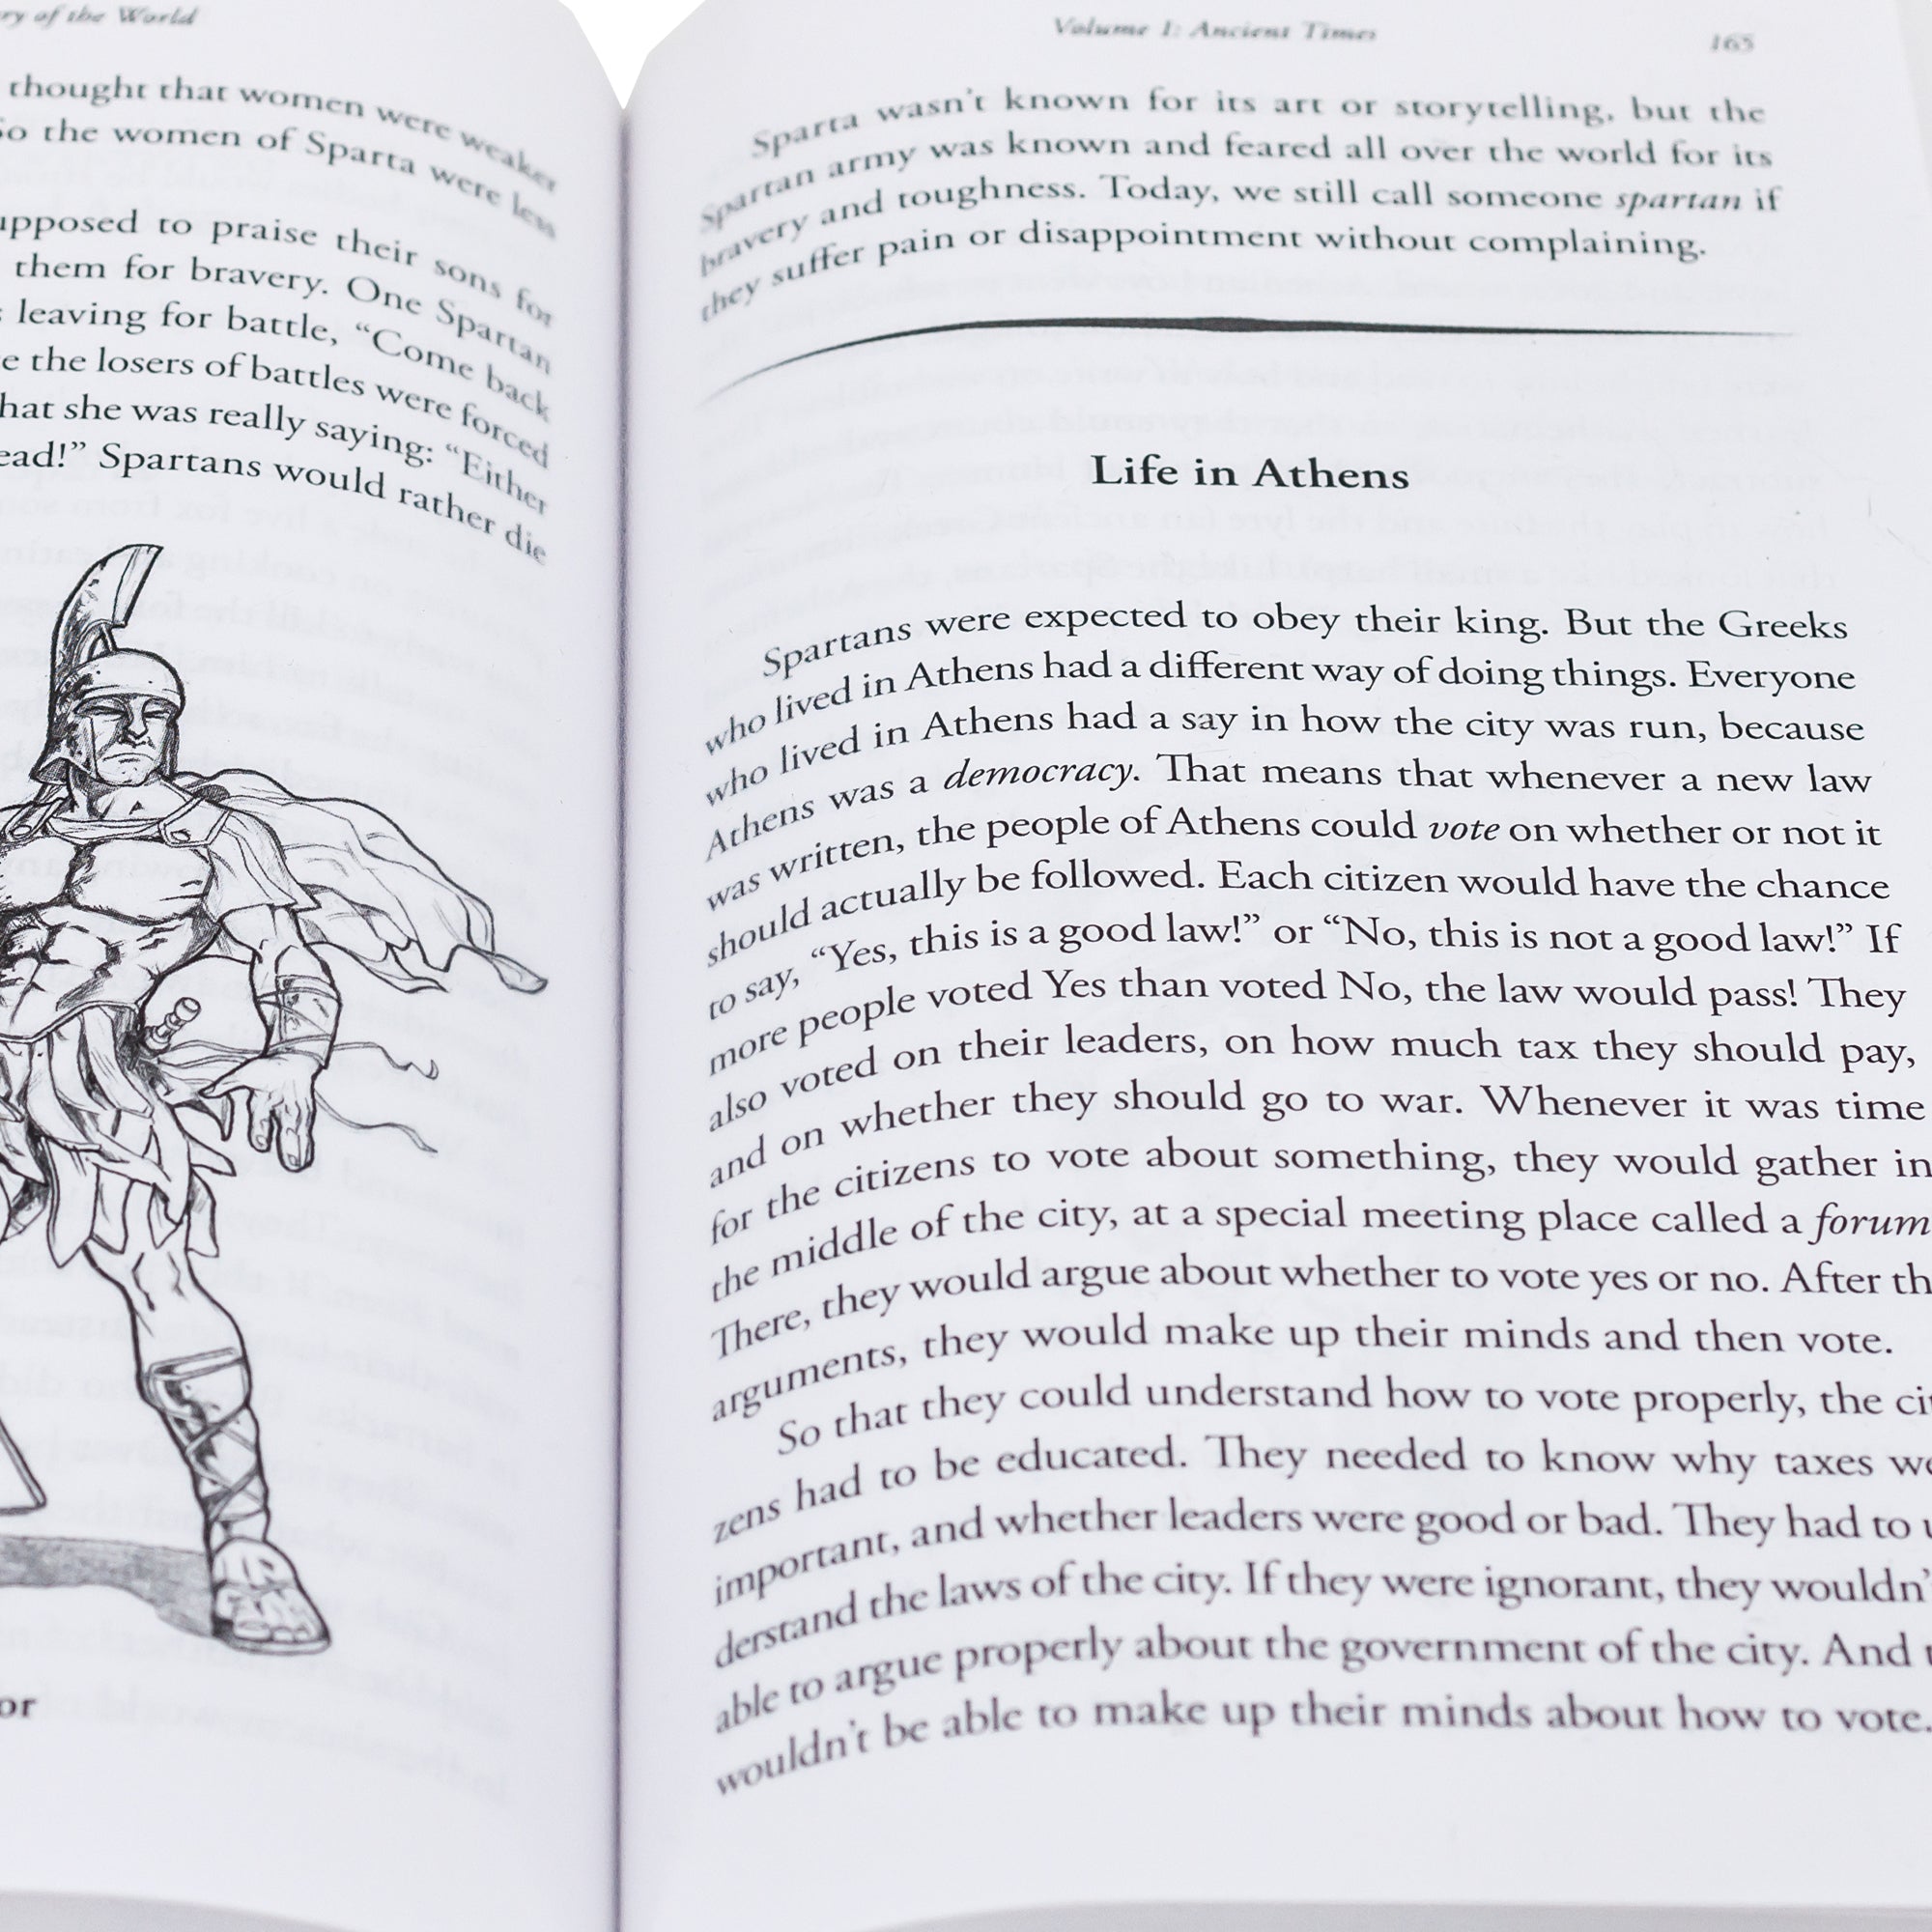 A close up shot of The Story of the World, Volume 1, Ancient Times open to show inside pages. On the left page under some text, is a black and white illustration of a Spartan Warrior. On the right is more text and a title reading “Life in Athens,” then more text.